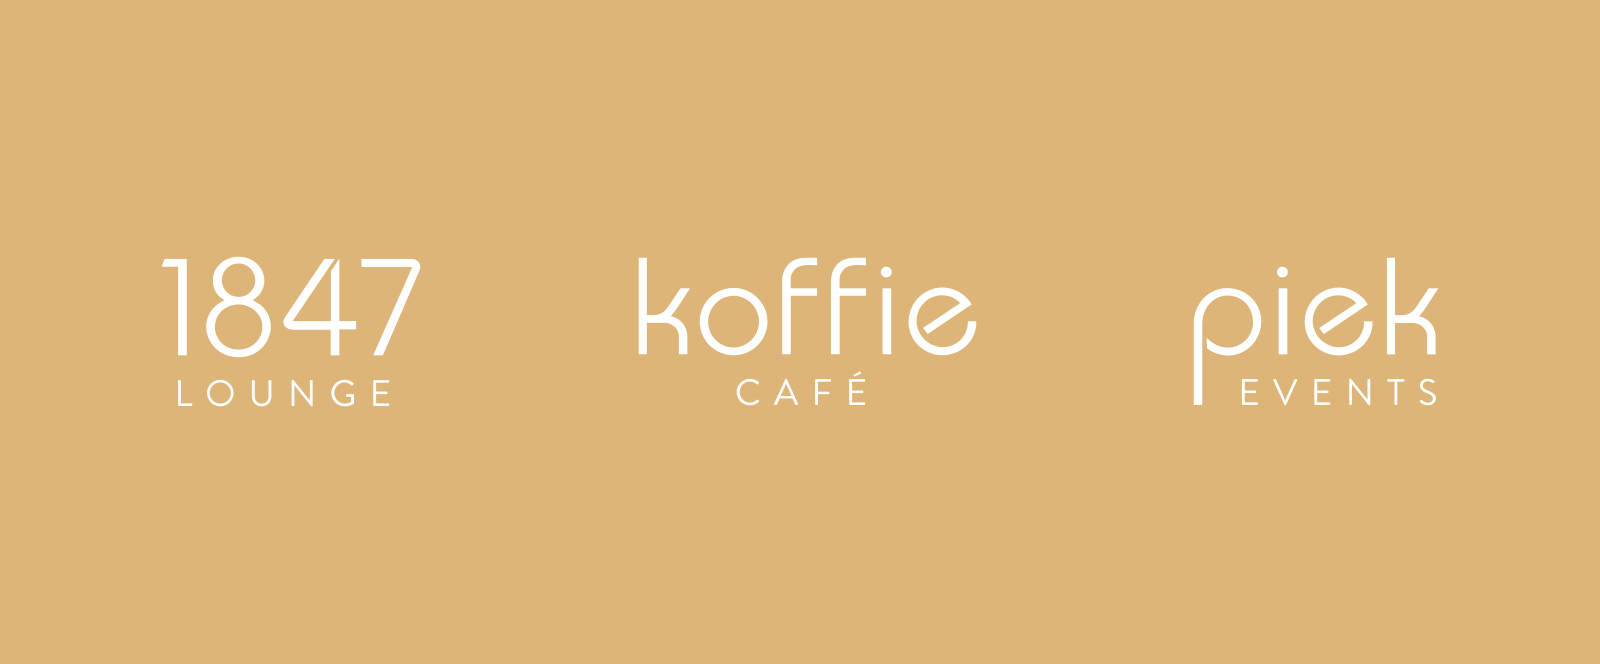 Additional brand logos for 1847 Lounge, Koffie Cafe and Piek Events.